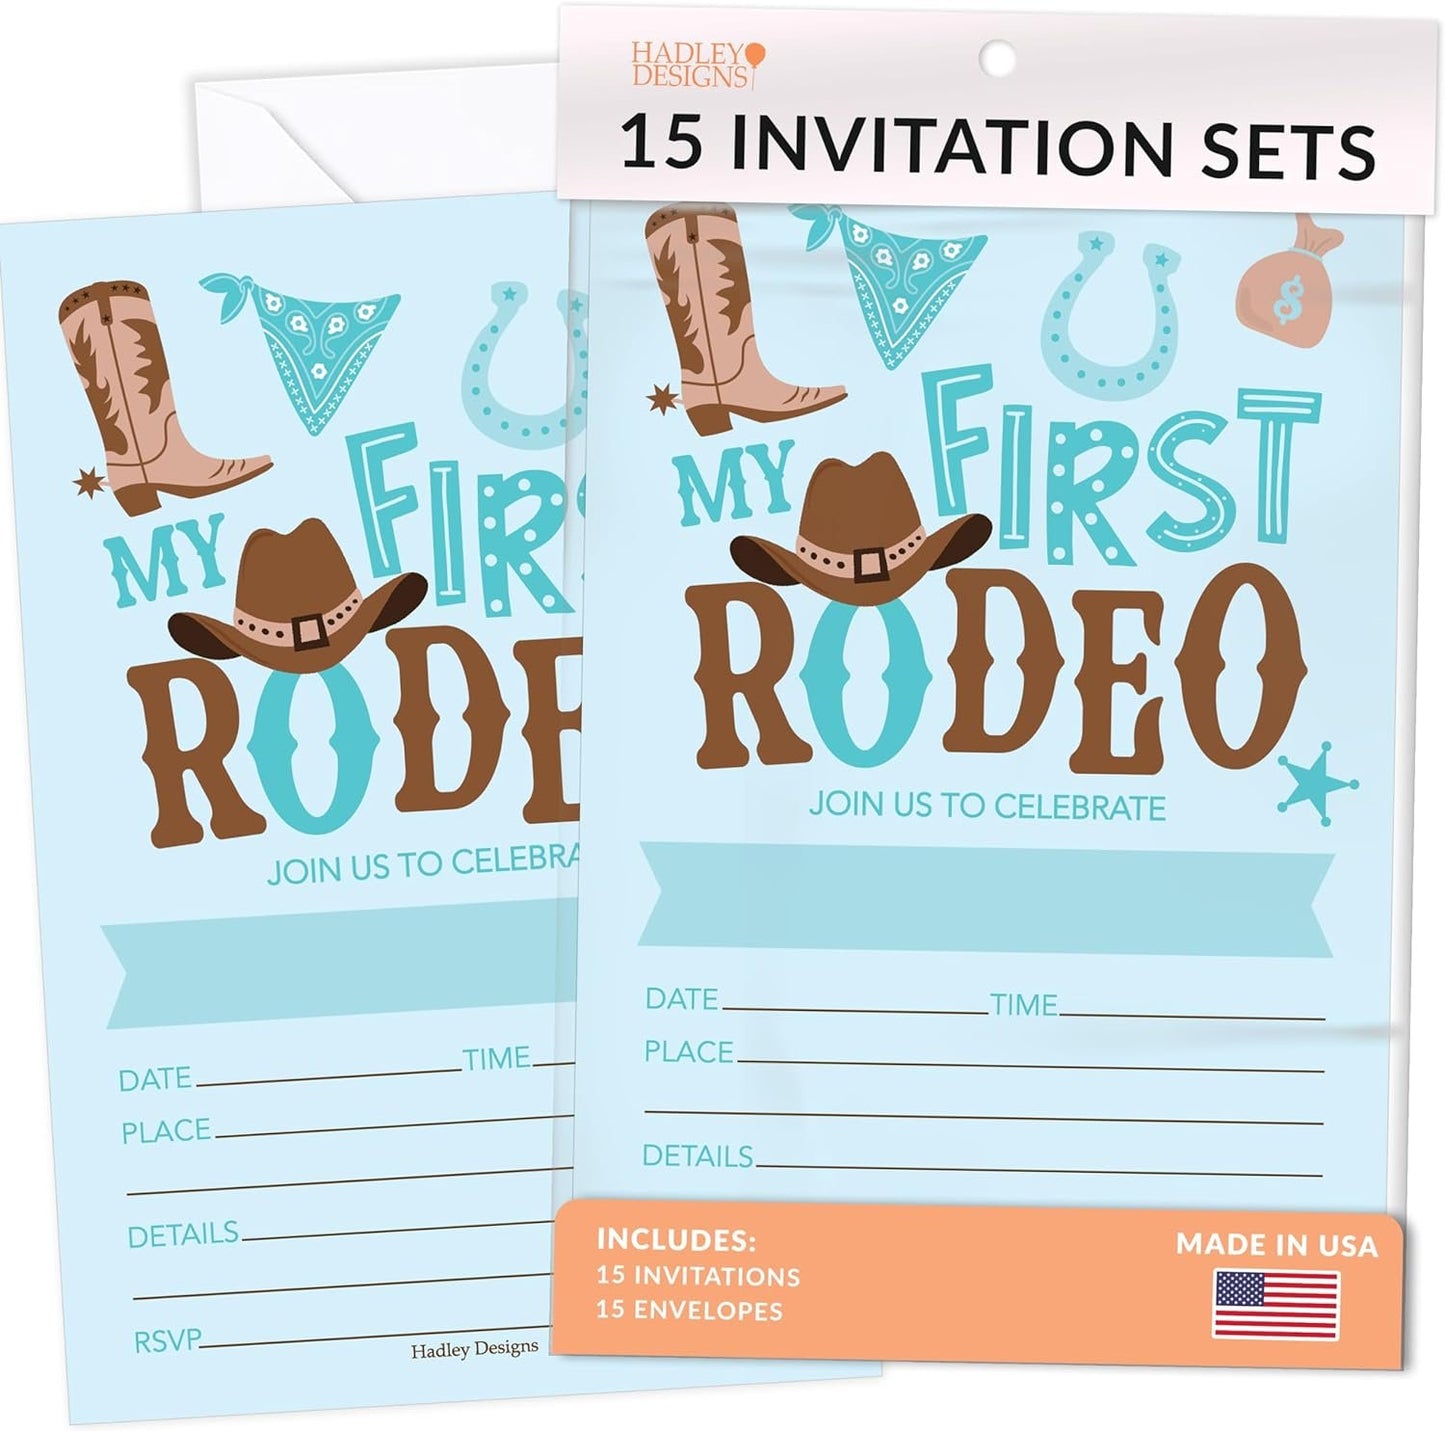 15 First Rodeo Birthday Invitations For Boys - Cowboy Birthday Invites For Boy, 1st Rodeo Birthday Party Invitations For Boys, Boy Birthday Invitations Boy, Western Invitations For Birthday Party